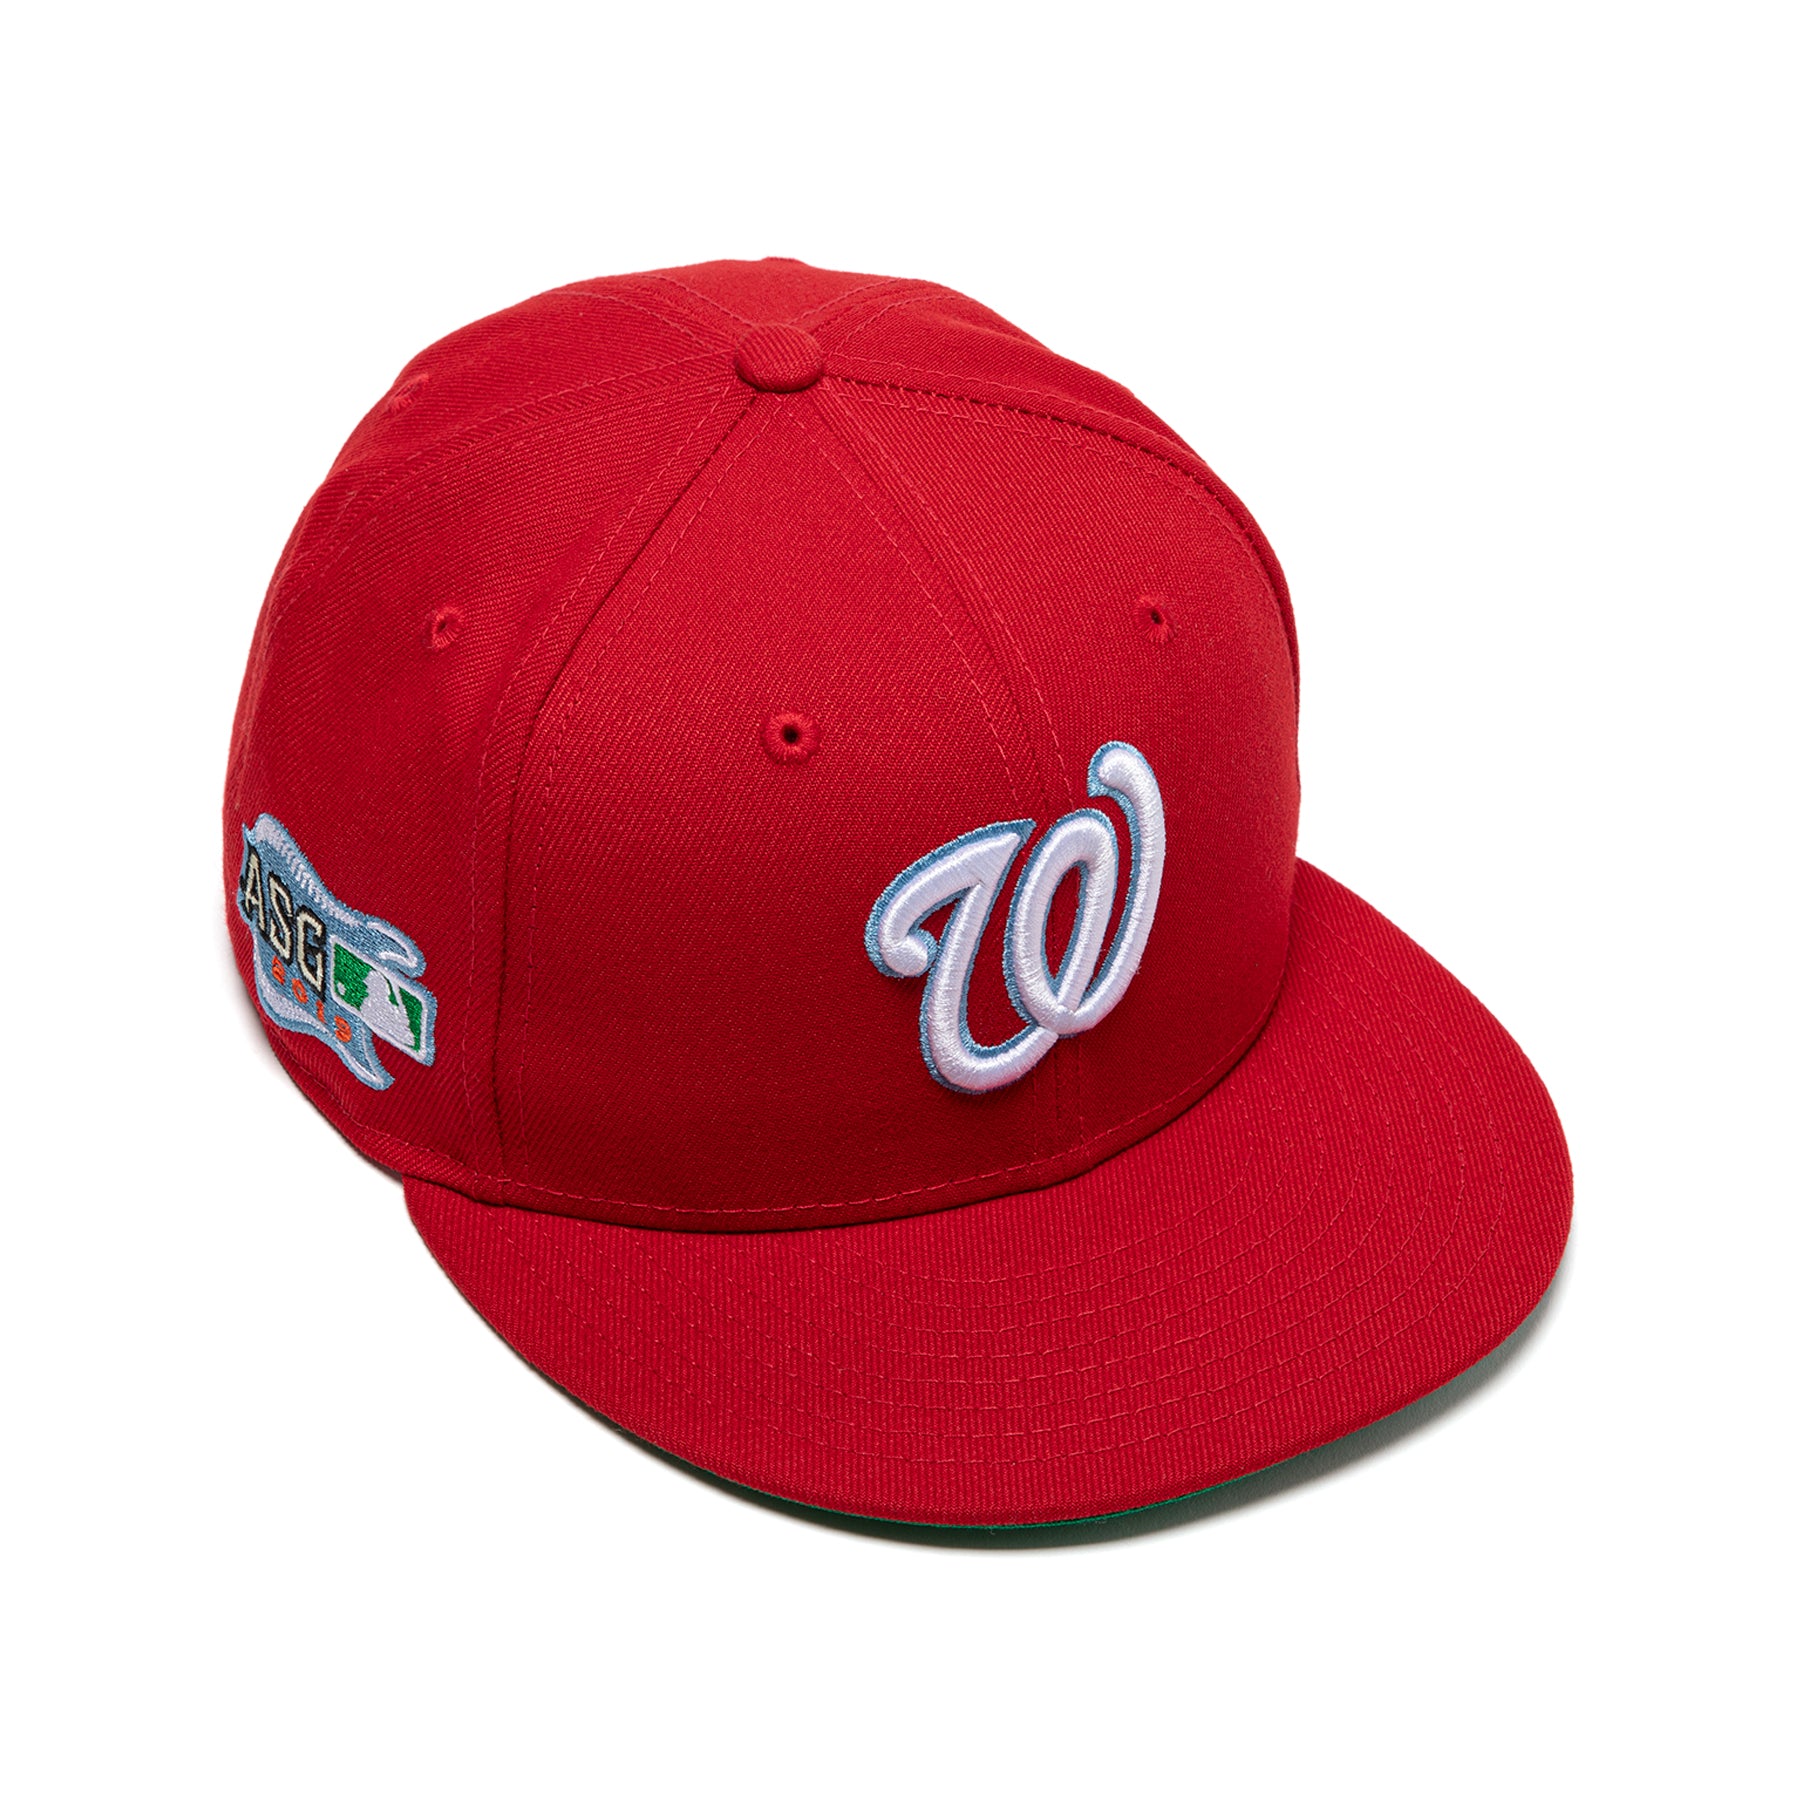 Concepts x New Era 59FIFTY Washington Nationals Fitted Hat (Red/Green) 7 1/2